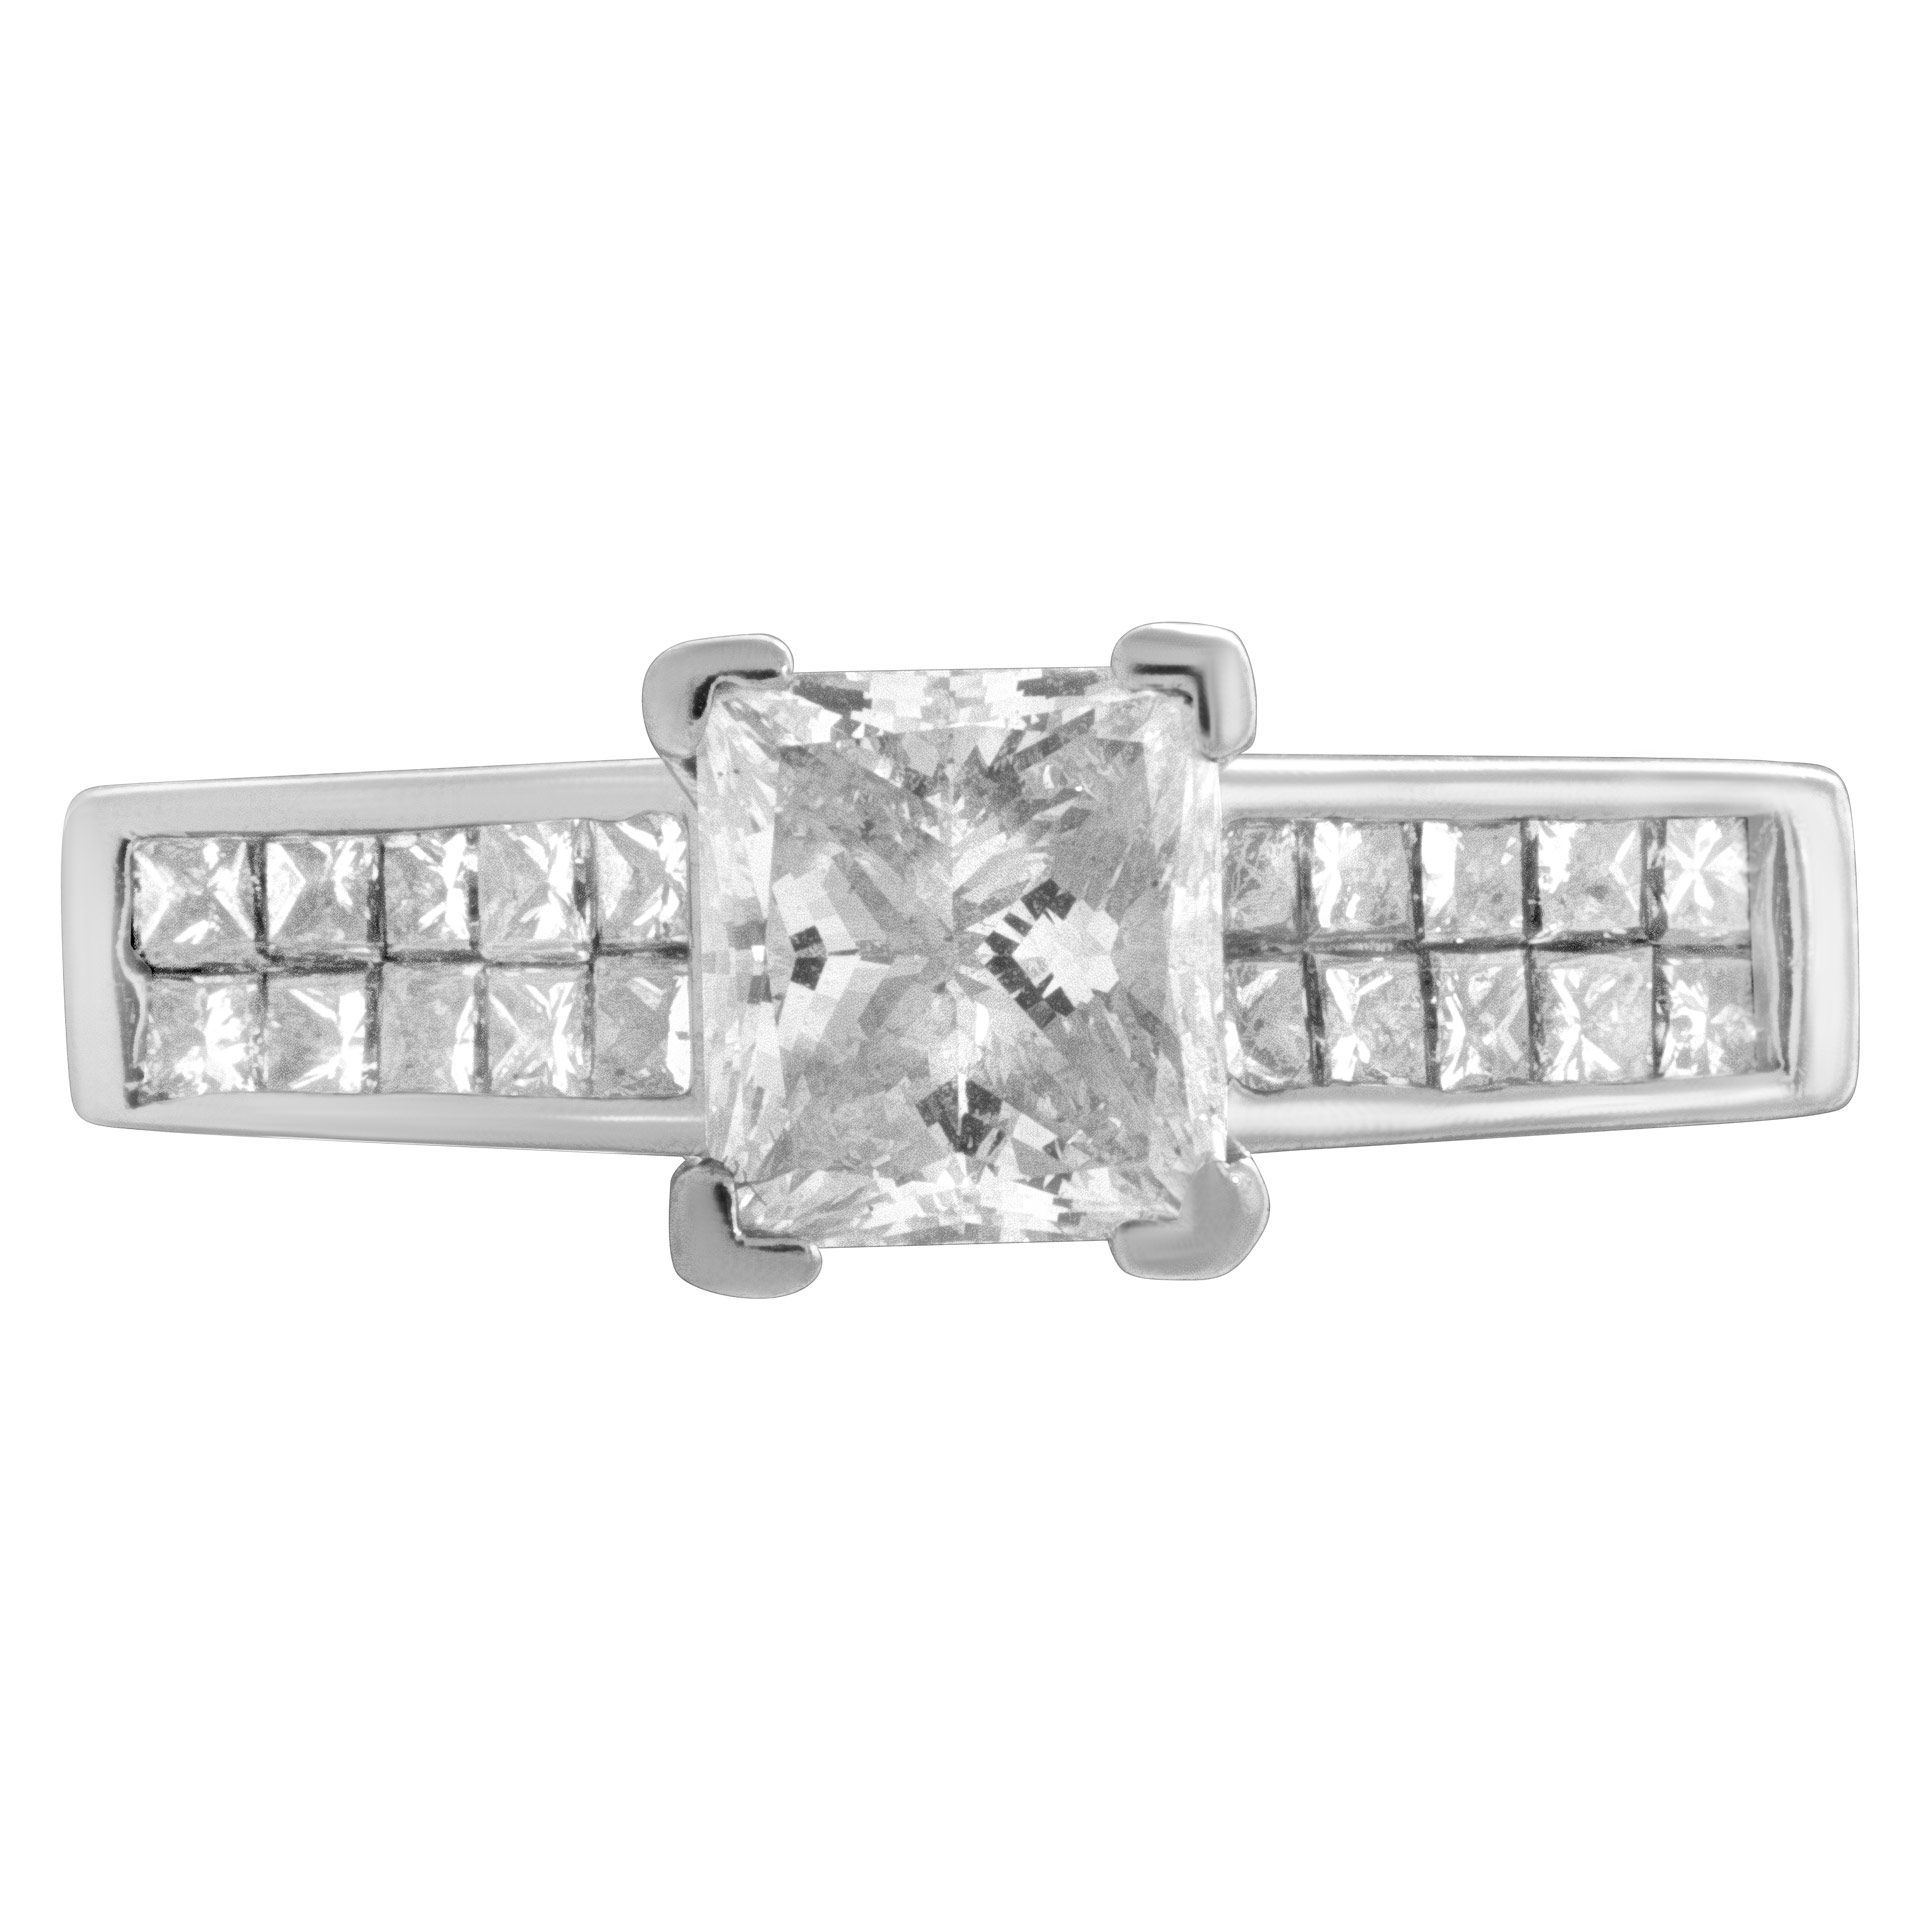 GIA certified diamond engagement ring with 1.01cts rectangular diamond (F color, SI2 clarity) set in 14k white gold